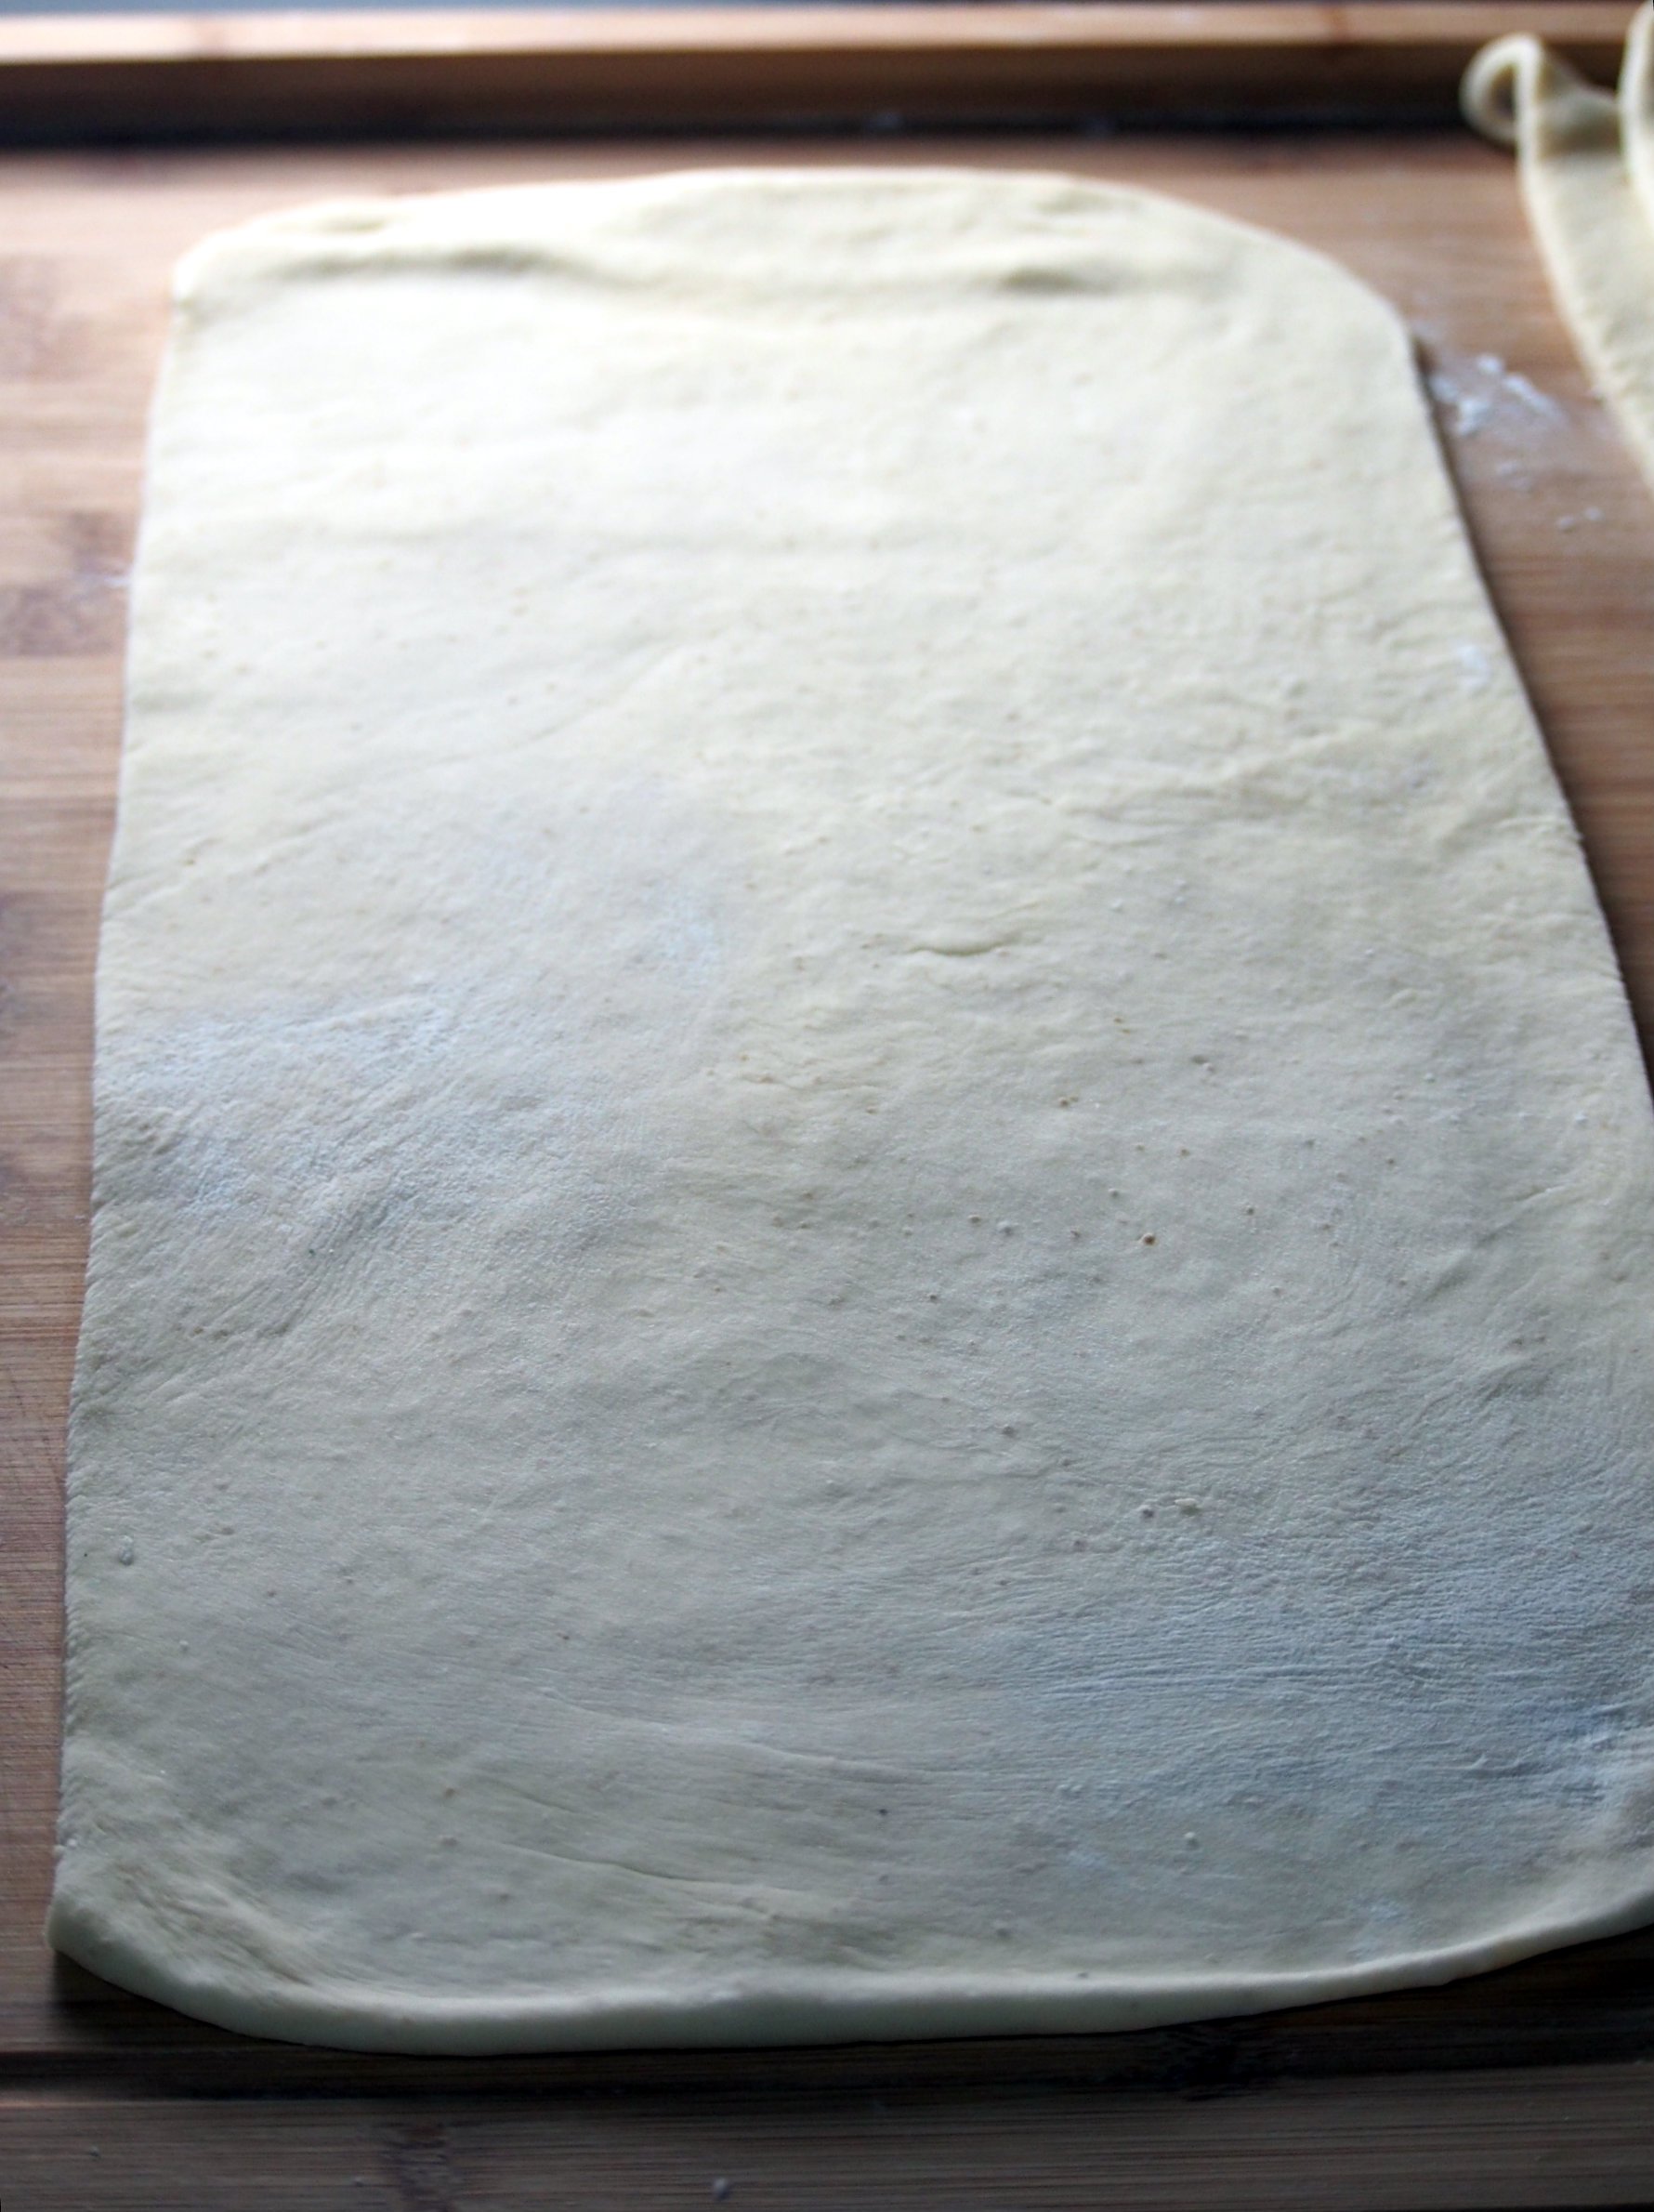 The dough is rolled into a rectangle.